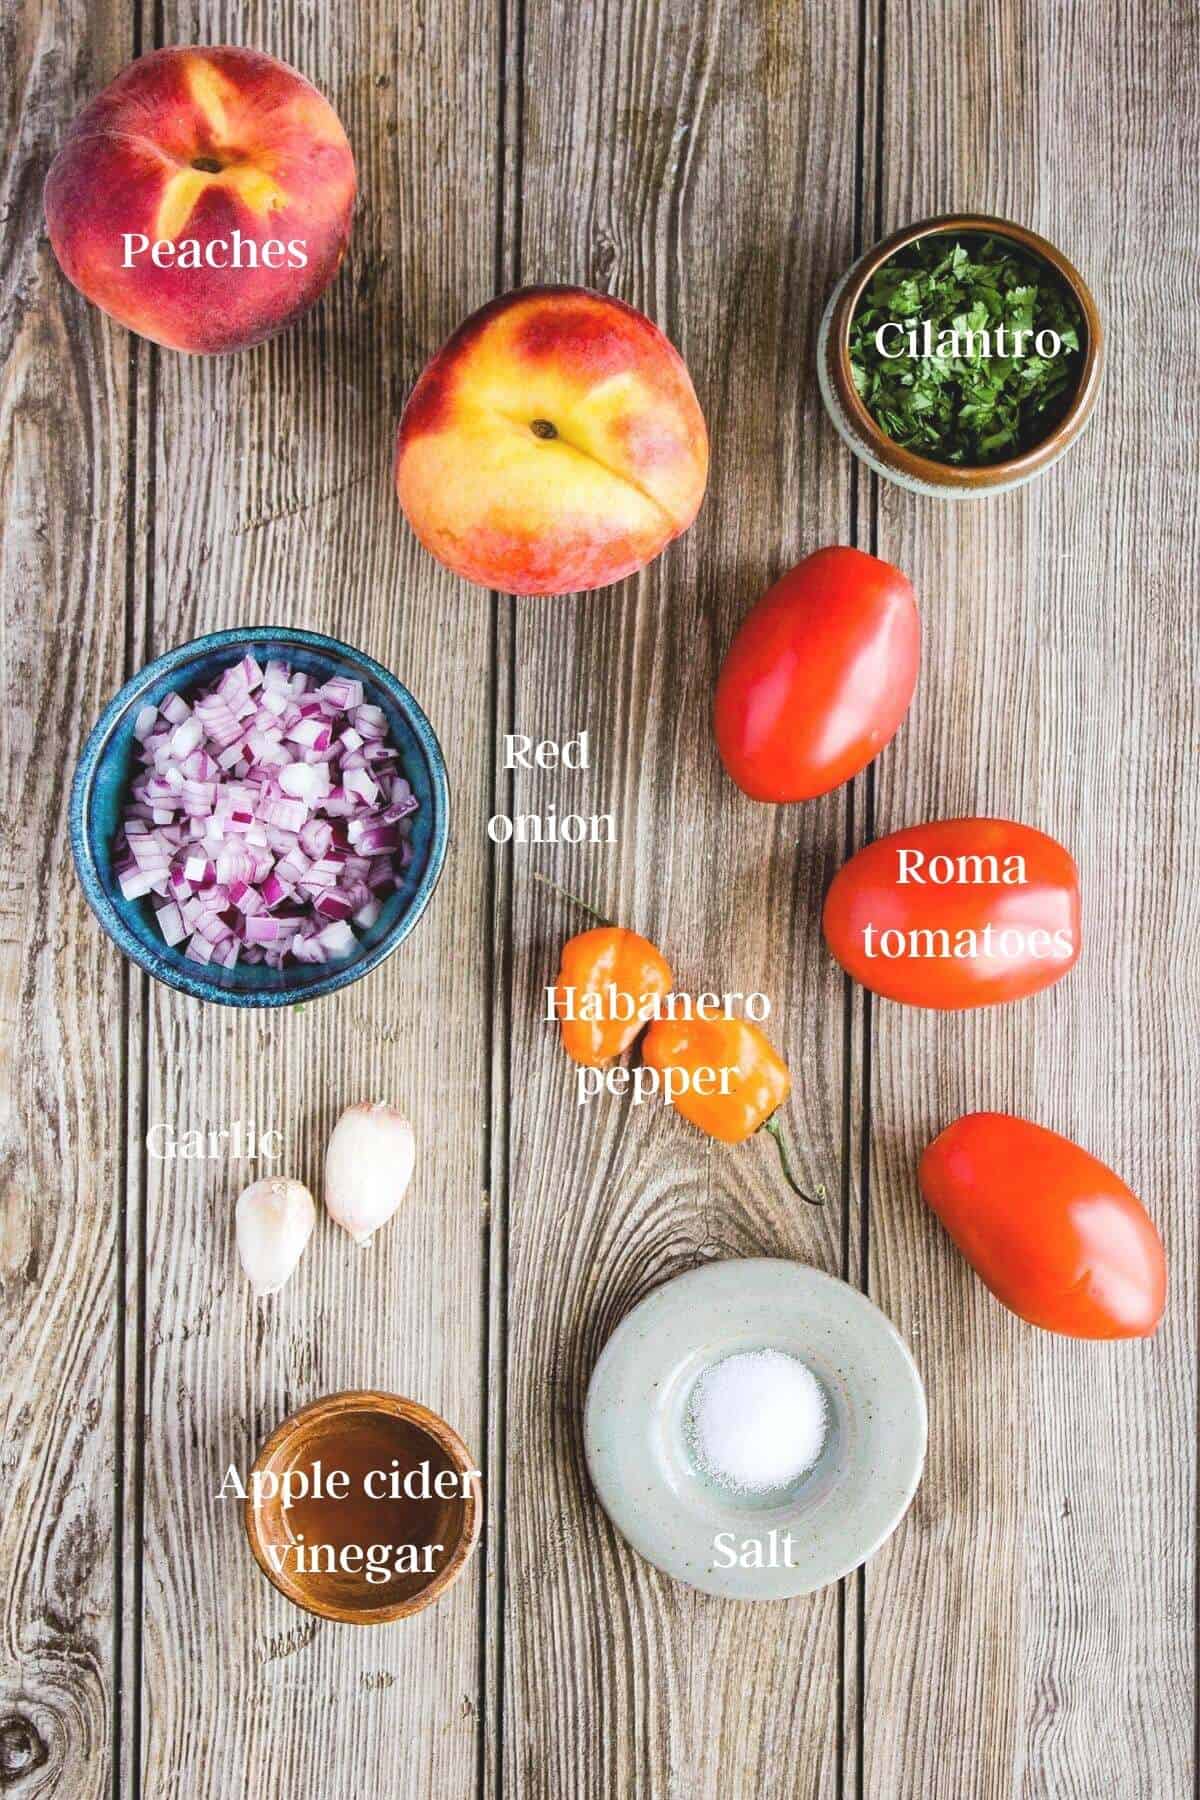 Ingredients for salsa (see recipe card).